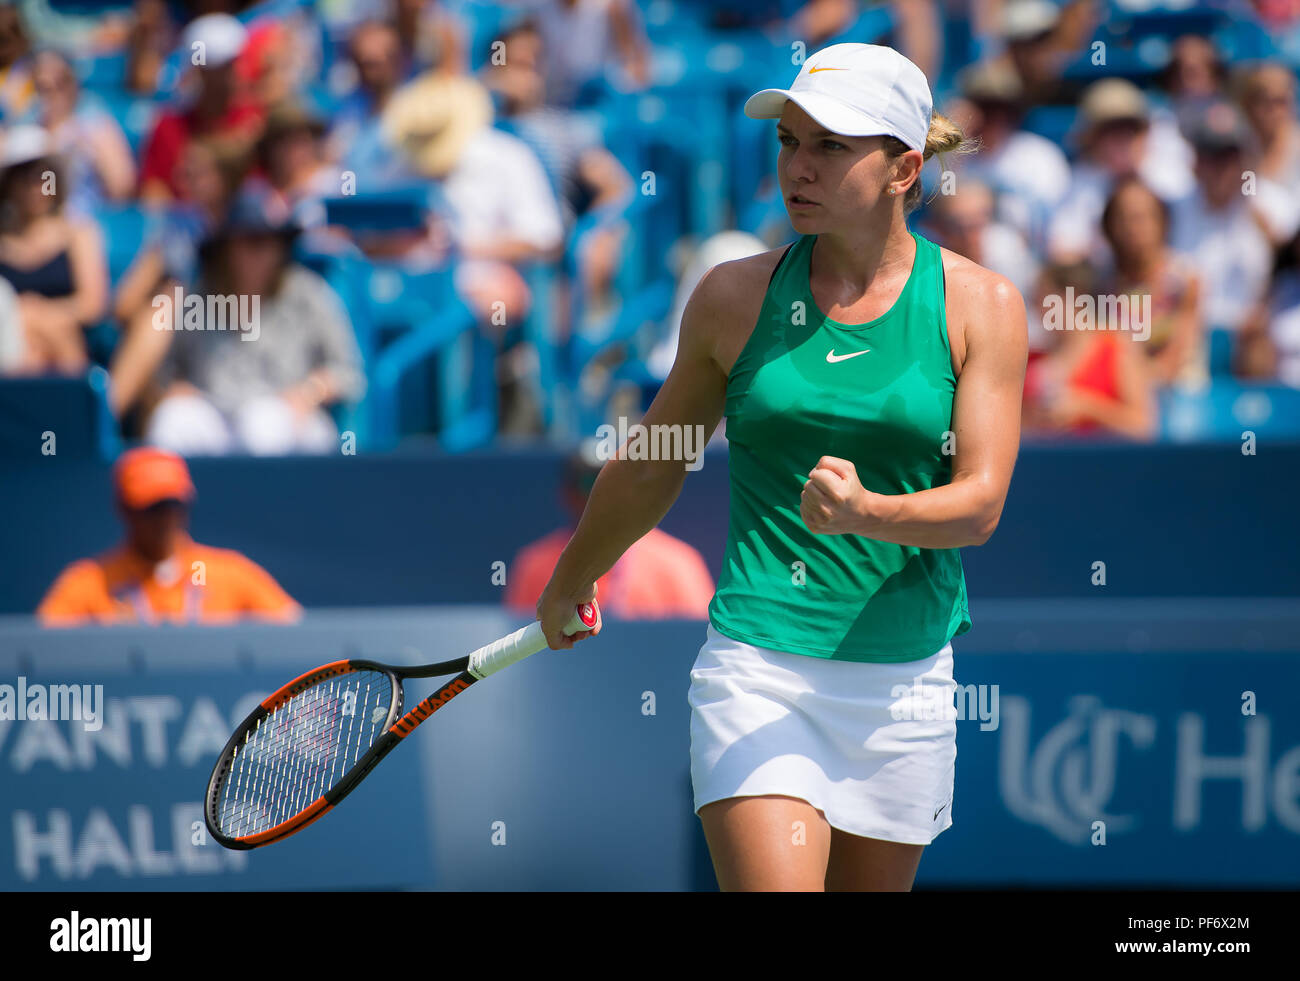 August 19, 2018 - Simona Halep of Romania in action during the final of the 2018 Western & Southern Open WTA Premier 5 tennis tournament. Cincinnati, Ohio, USA. August 19th 2018. Credit: AFP7/ZUMA Wire/Alamy Live News Stock Photo